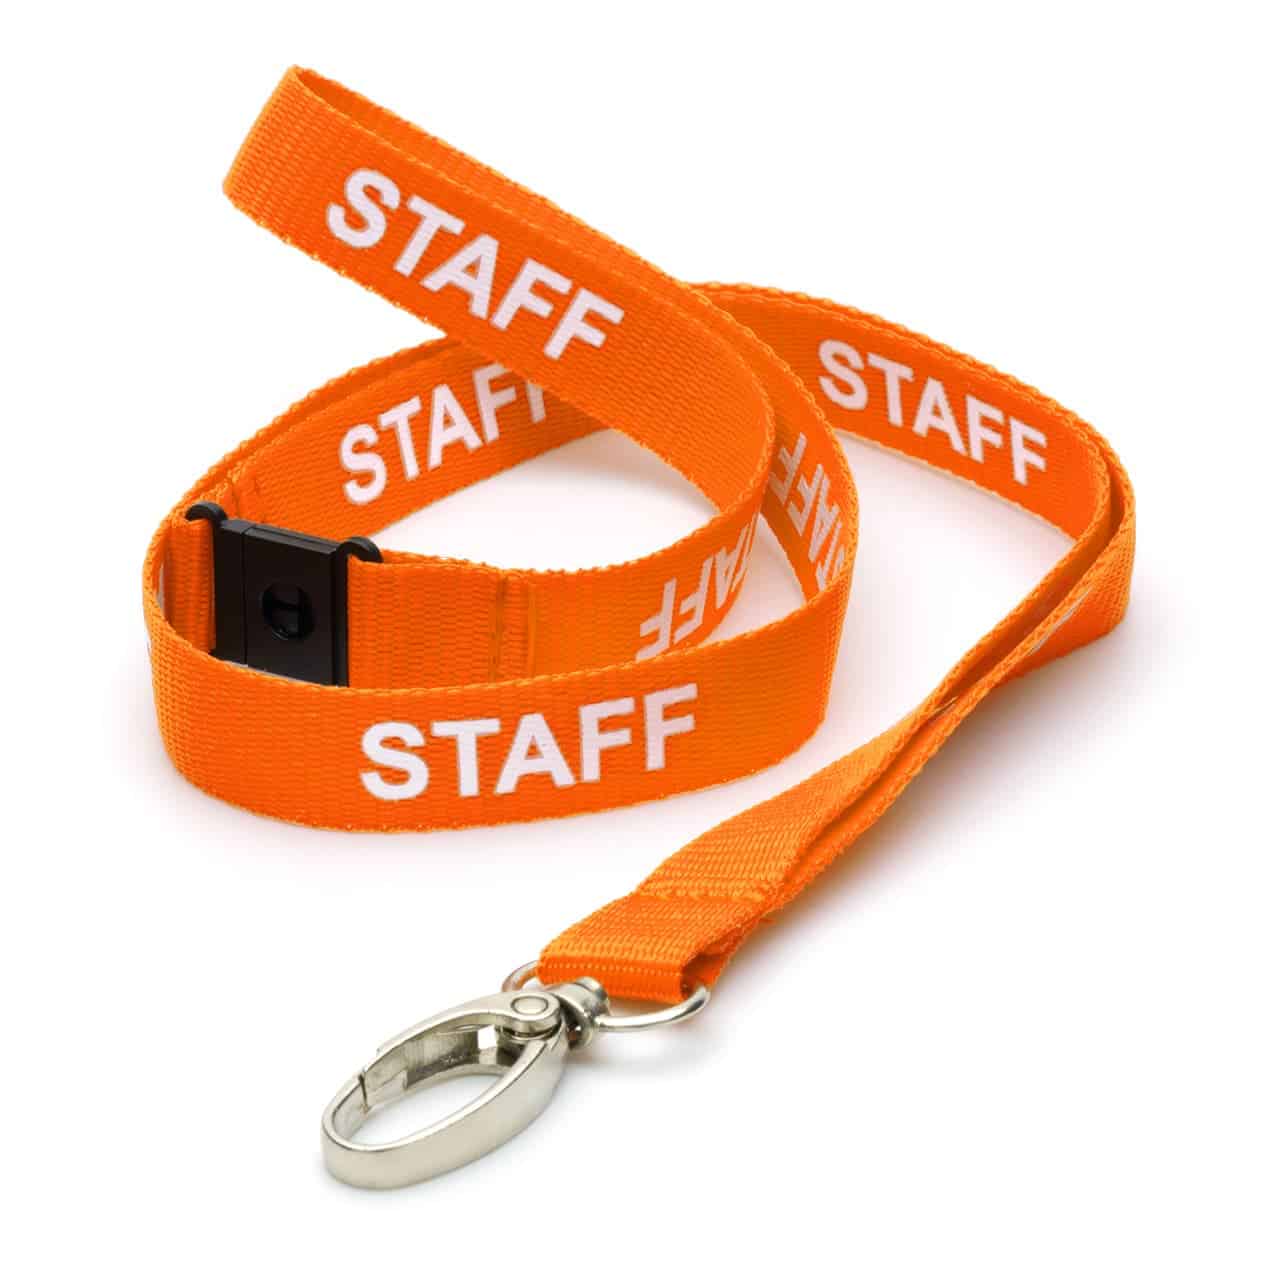 Pre-printed STAFF Lanyard with Metal Clip & Safety Catch Orange